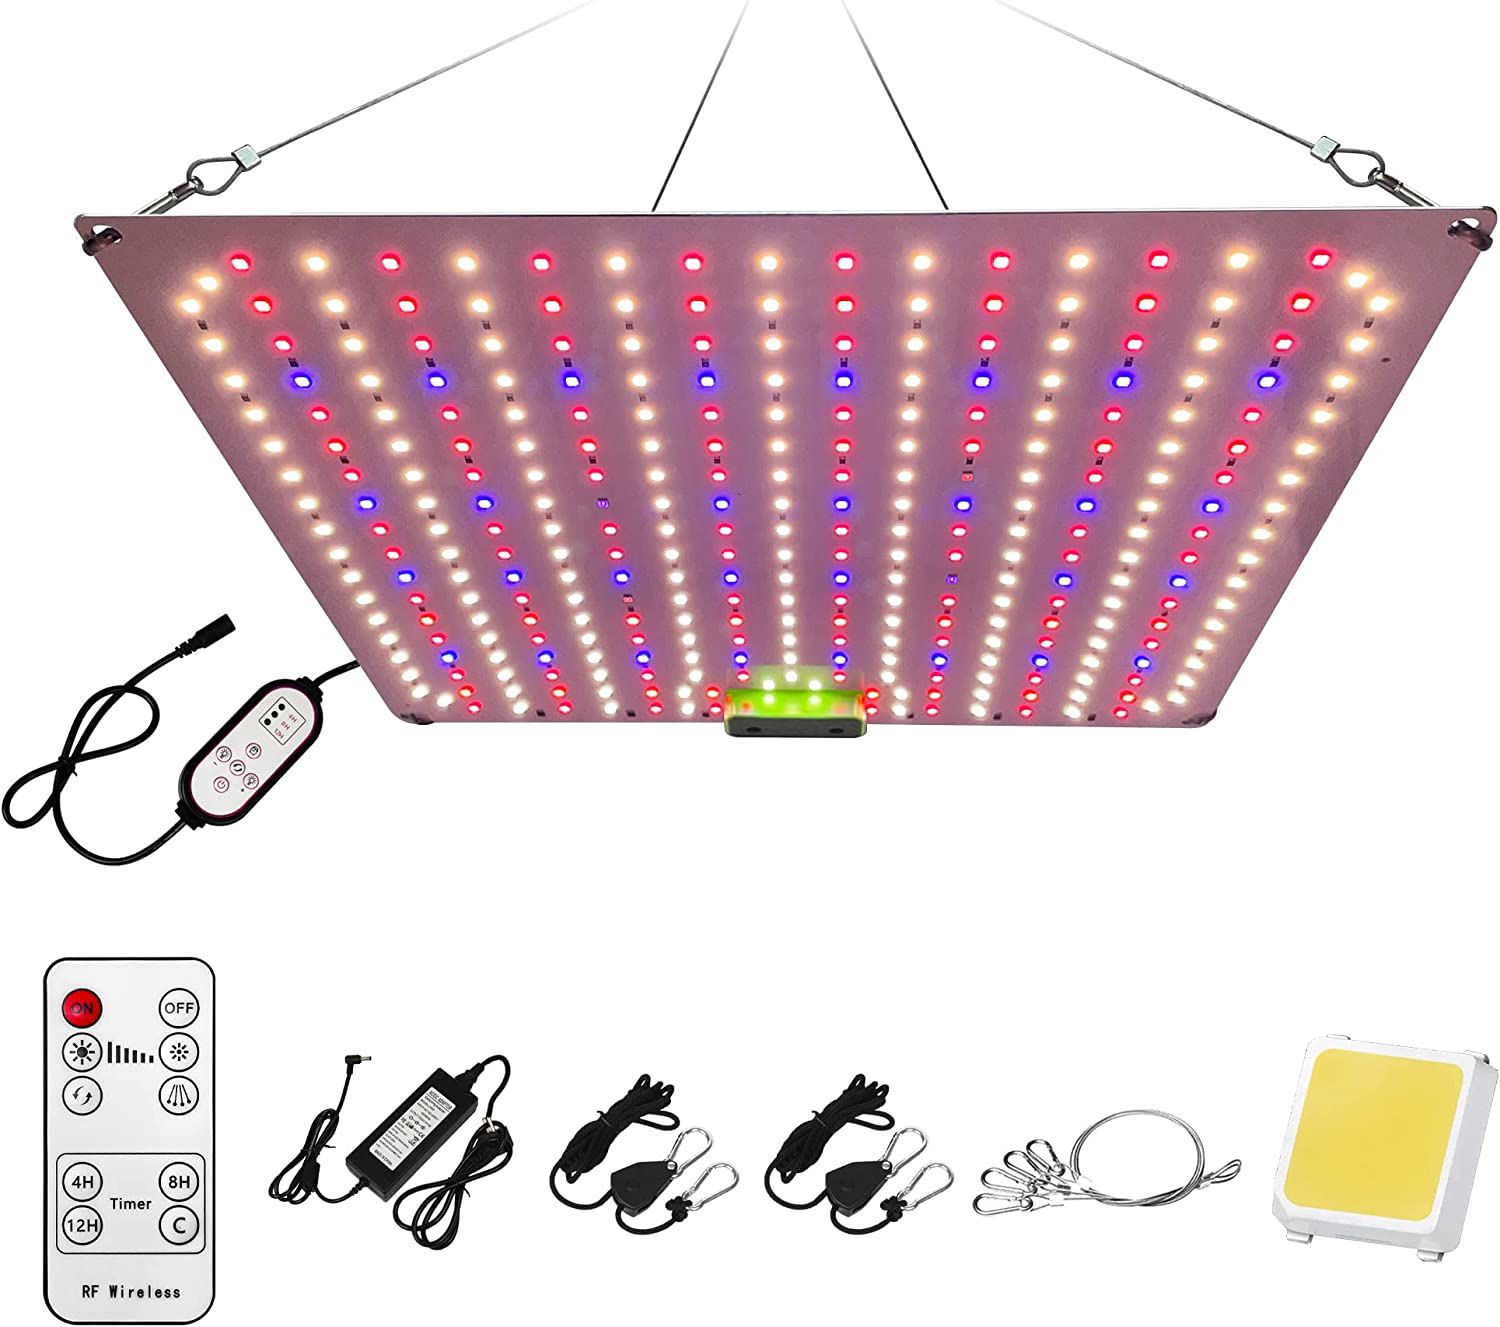 LED Plant Grow Light Dimmable with Samsung LM301B Diodes IR Lighting Full Spectrum Grow Light for Indoor Plants Veg Bloom Lamps Remote Timer Seedlings